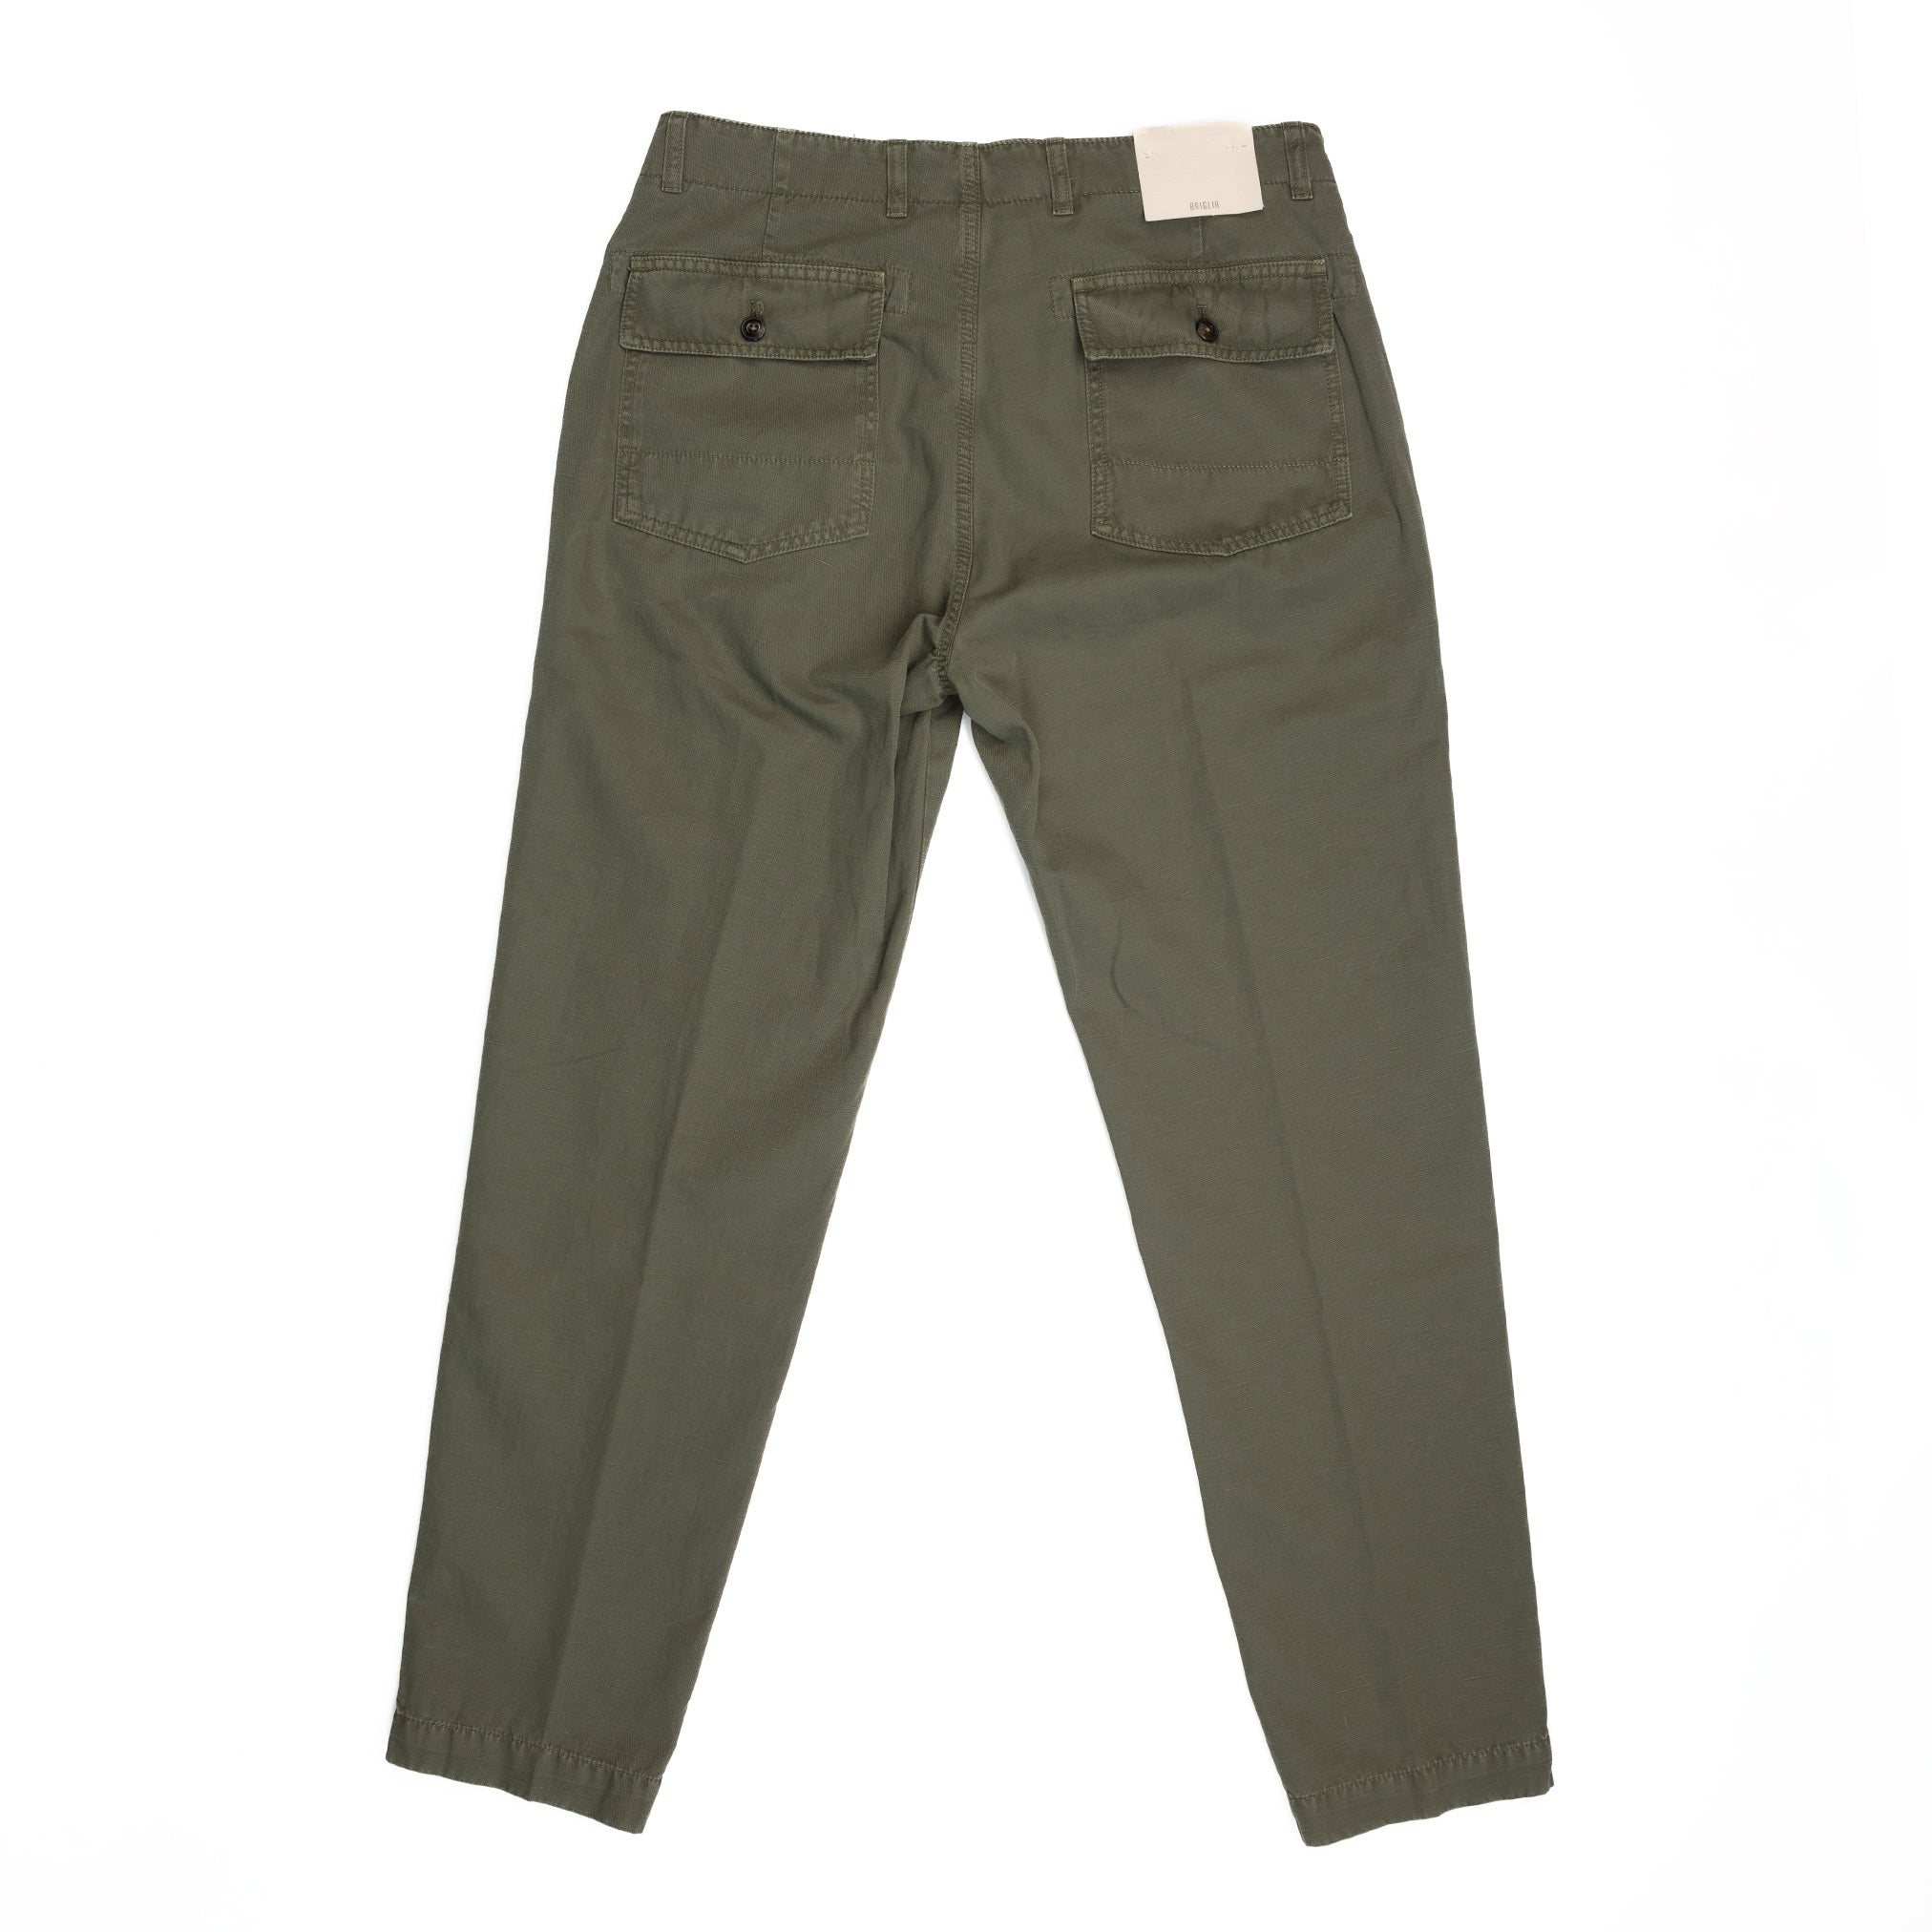 Cotton & Linen Fatigues in Green